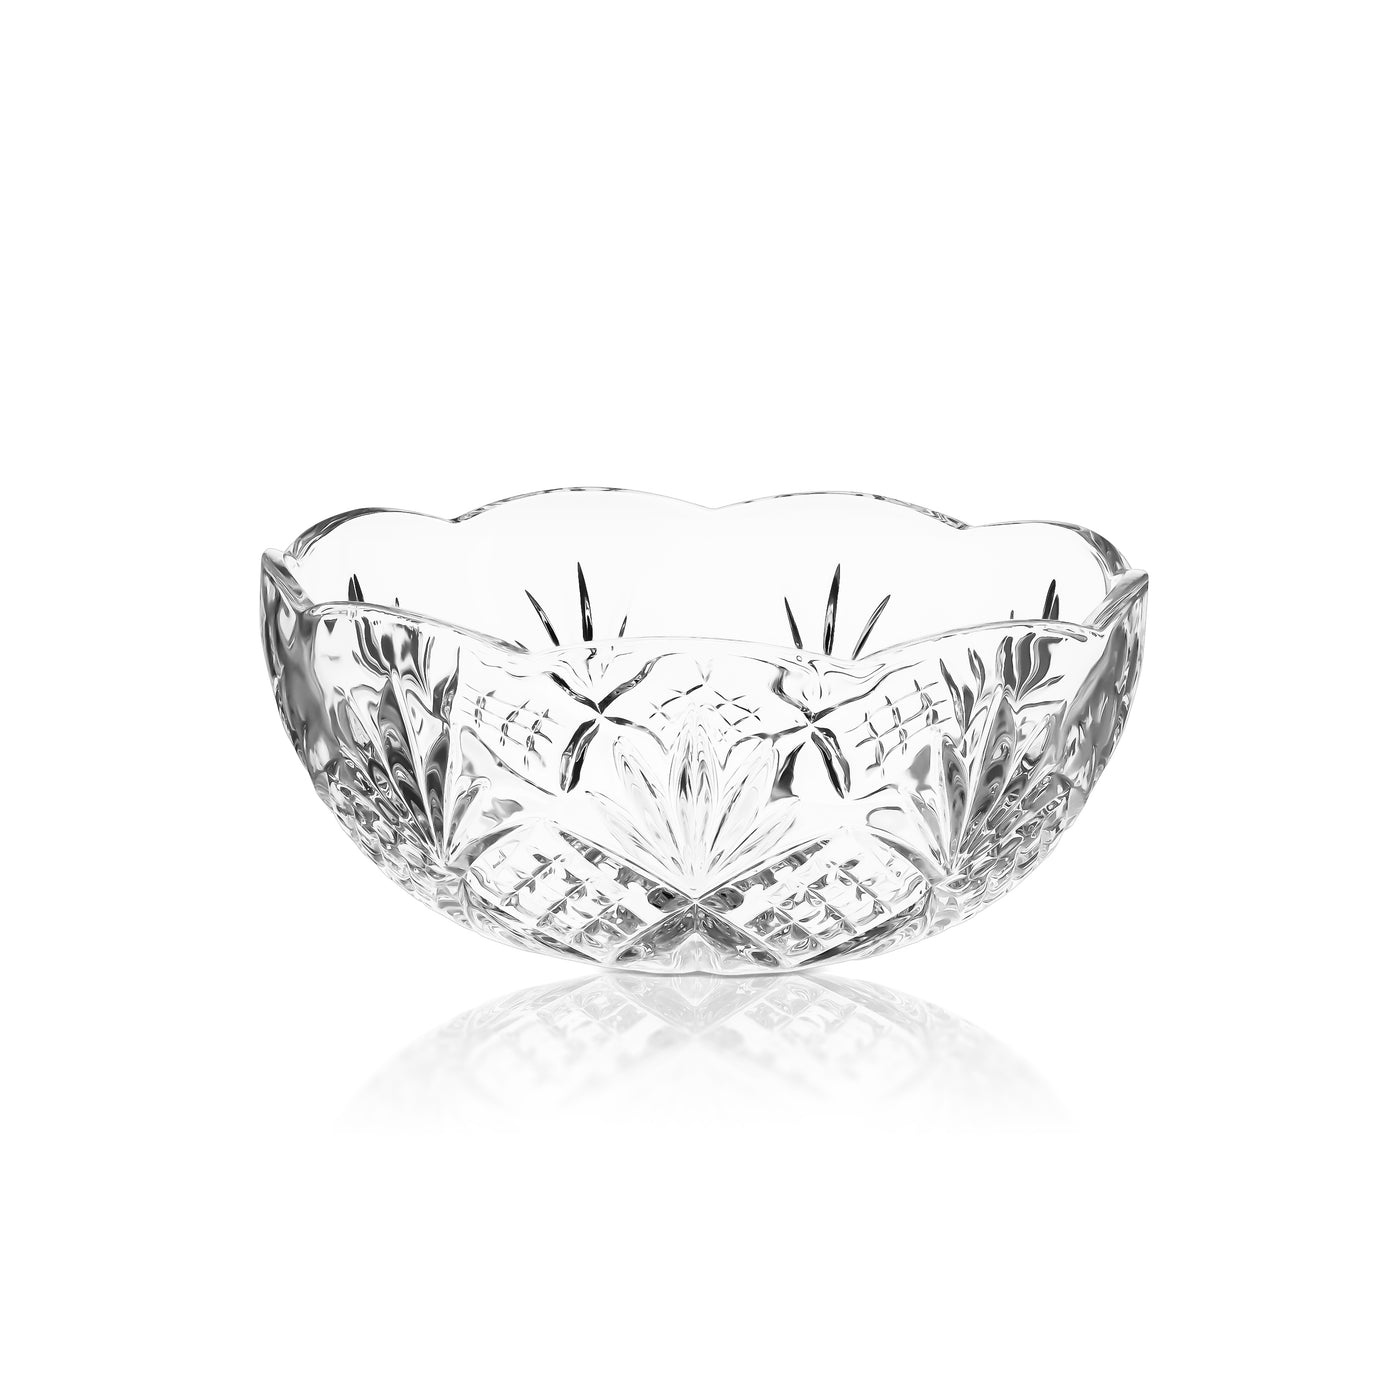 Tipperary Crystal Bowl - Belvedere 9"